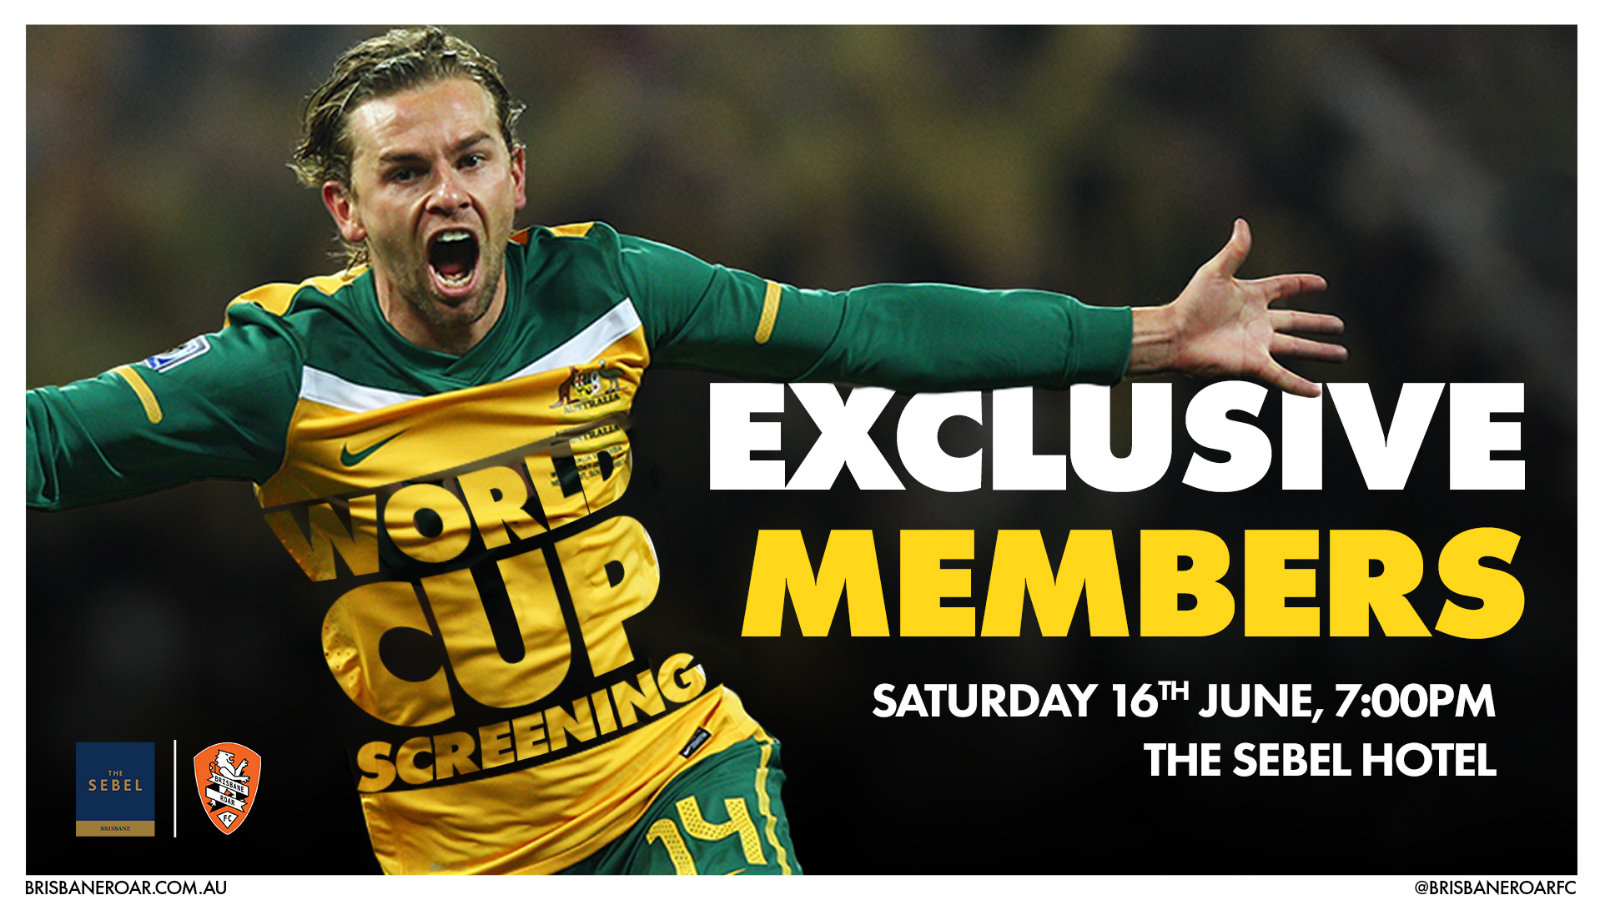 Join us for an exclusive World Cup screening!